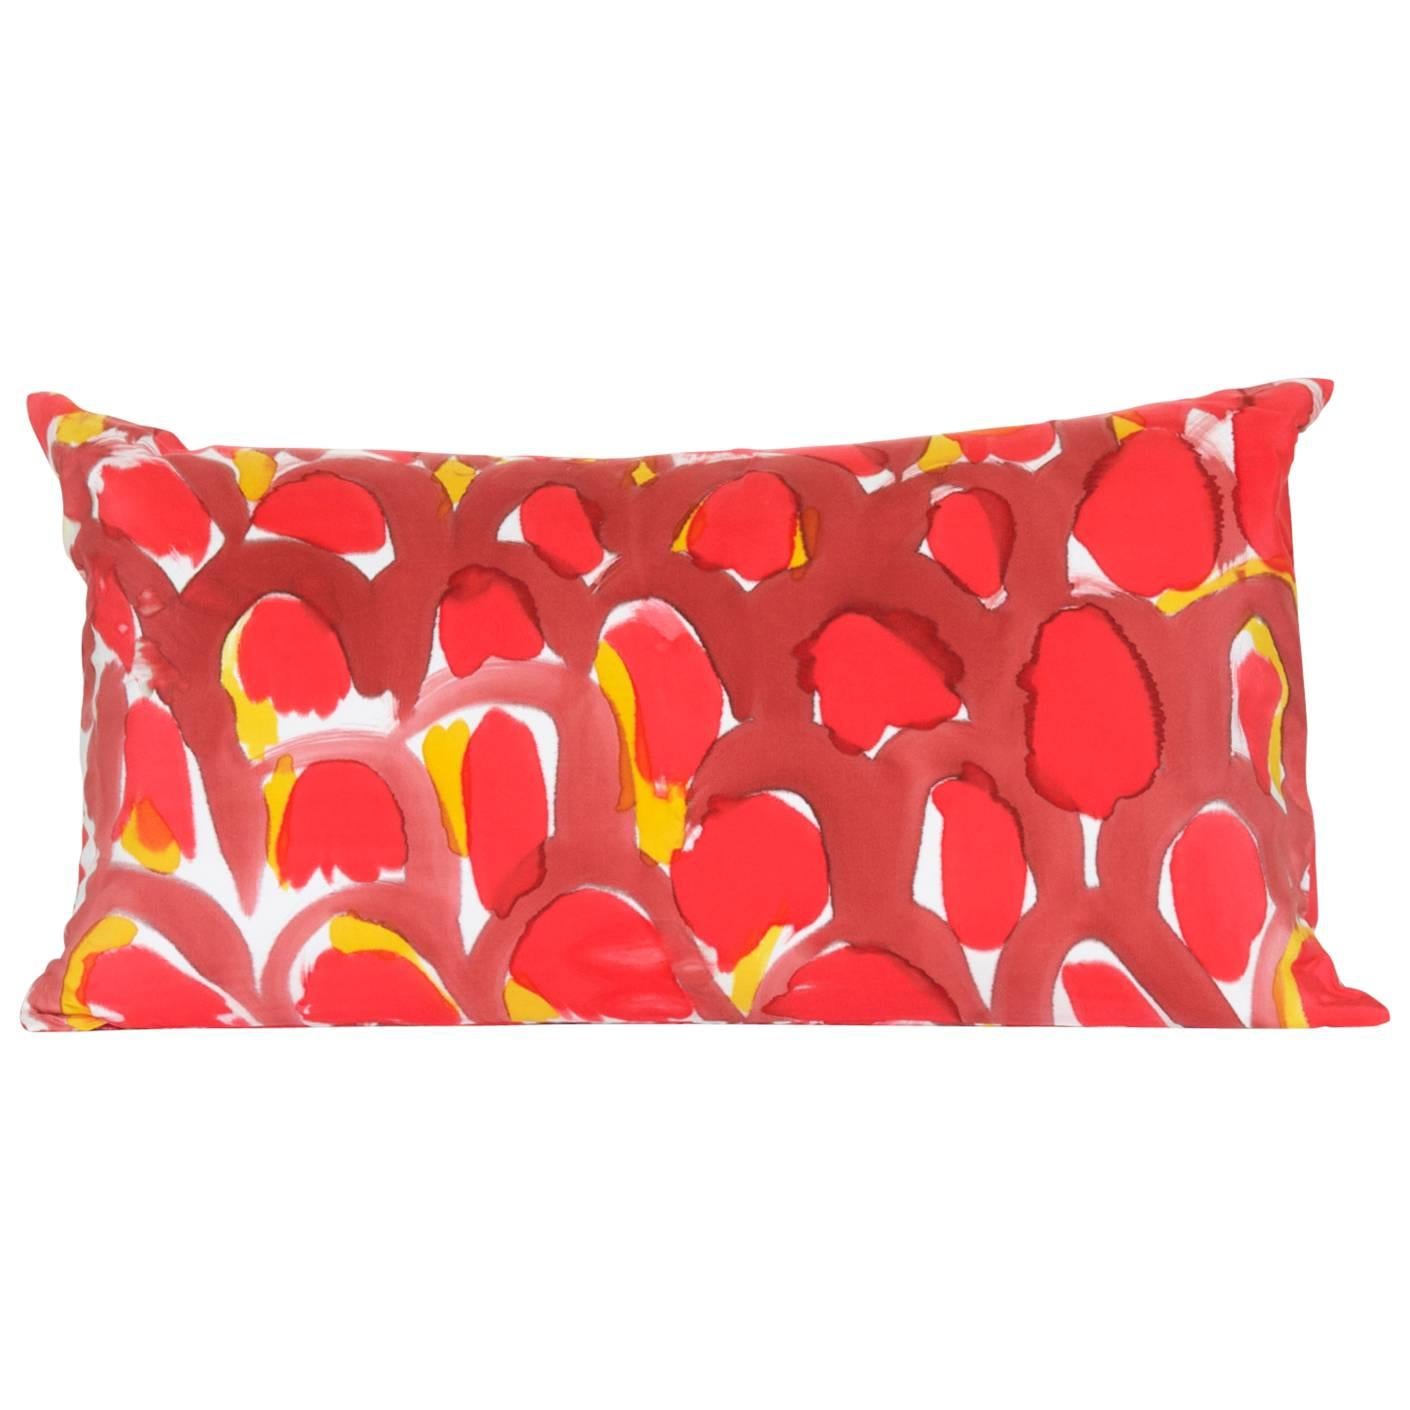 Hand-Painted Red Scales Lumbar Silk Charmeuse Pillow